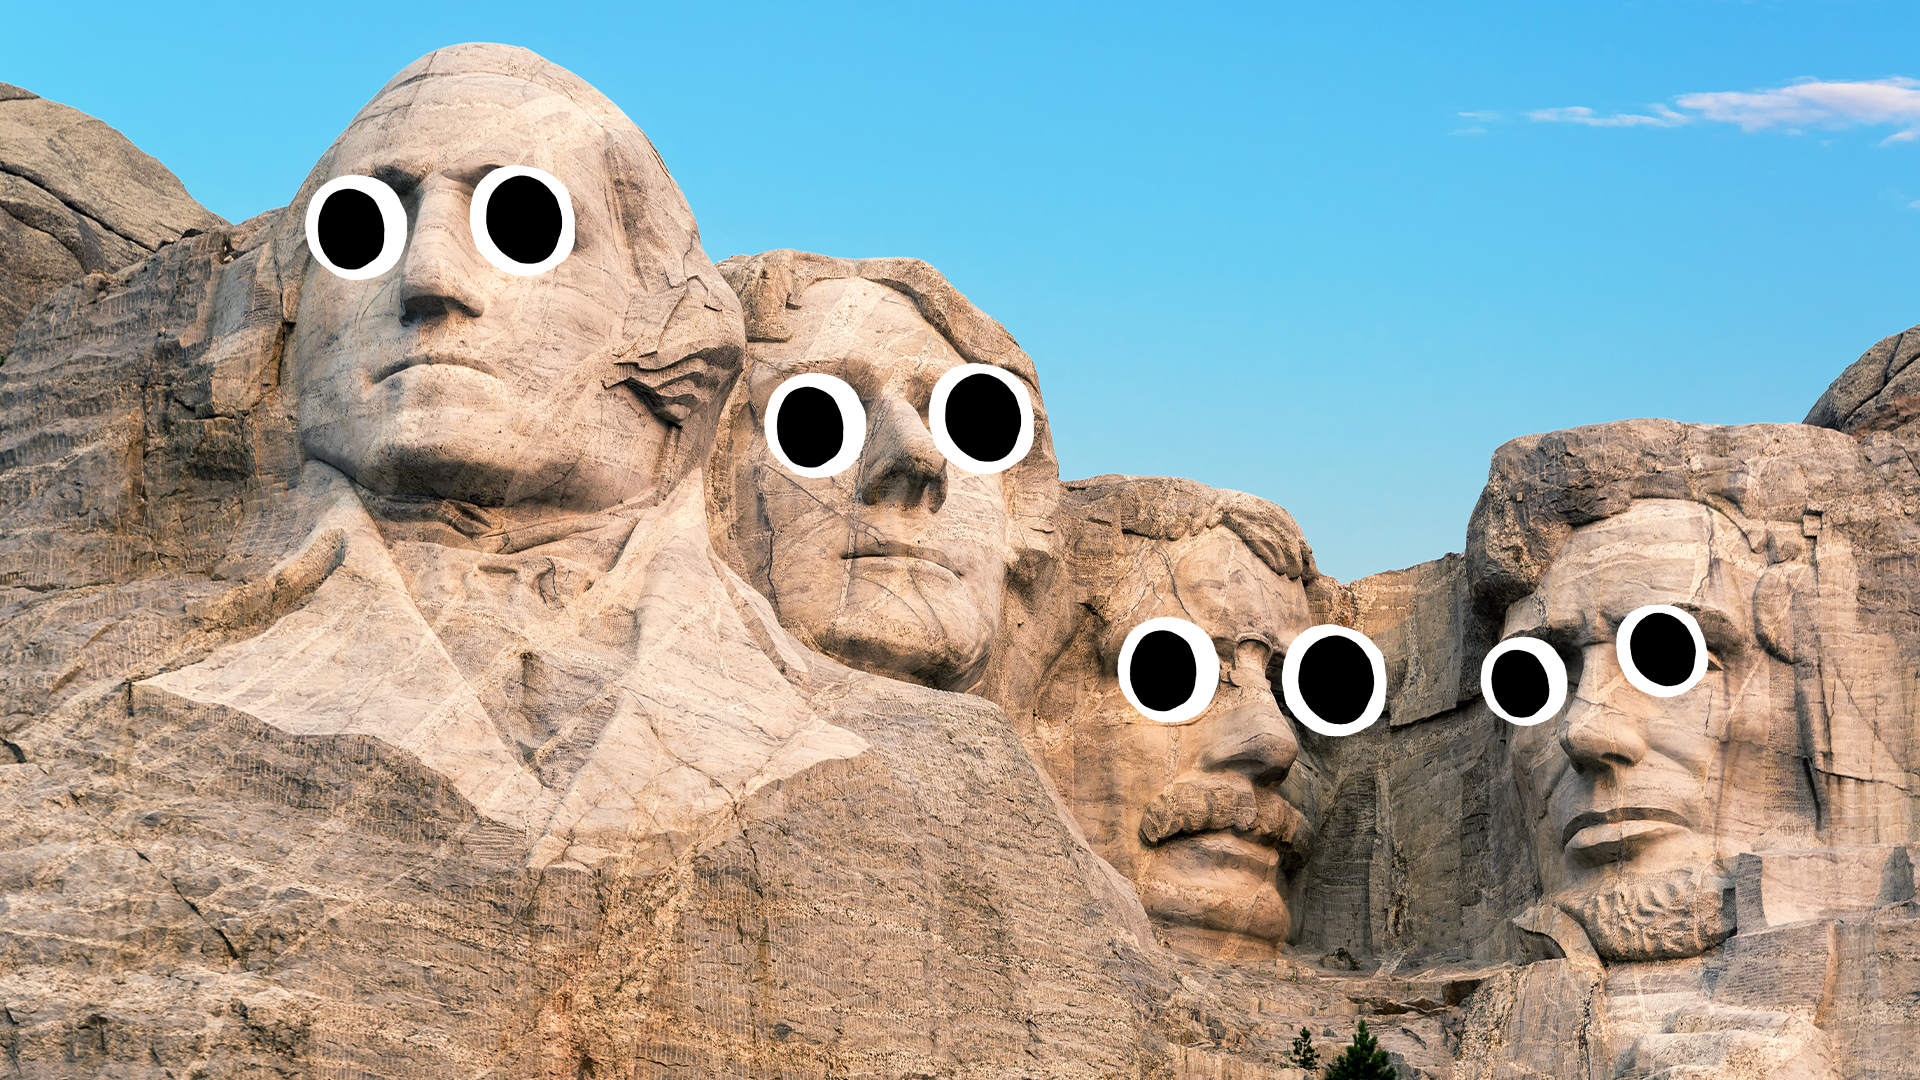 The four presidents carved into the rock face of Mount Rushmore